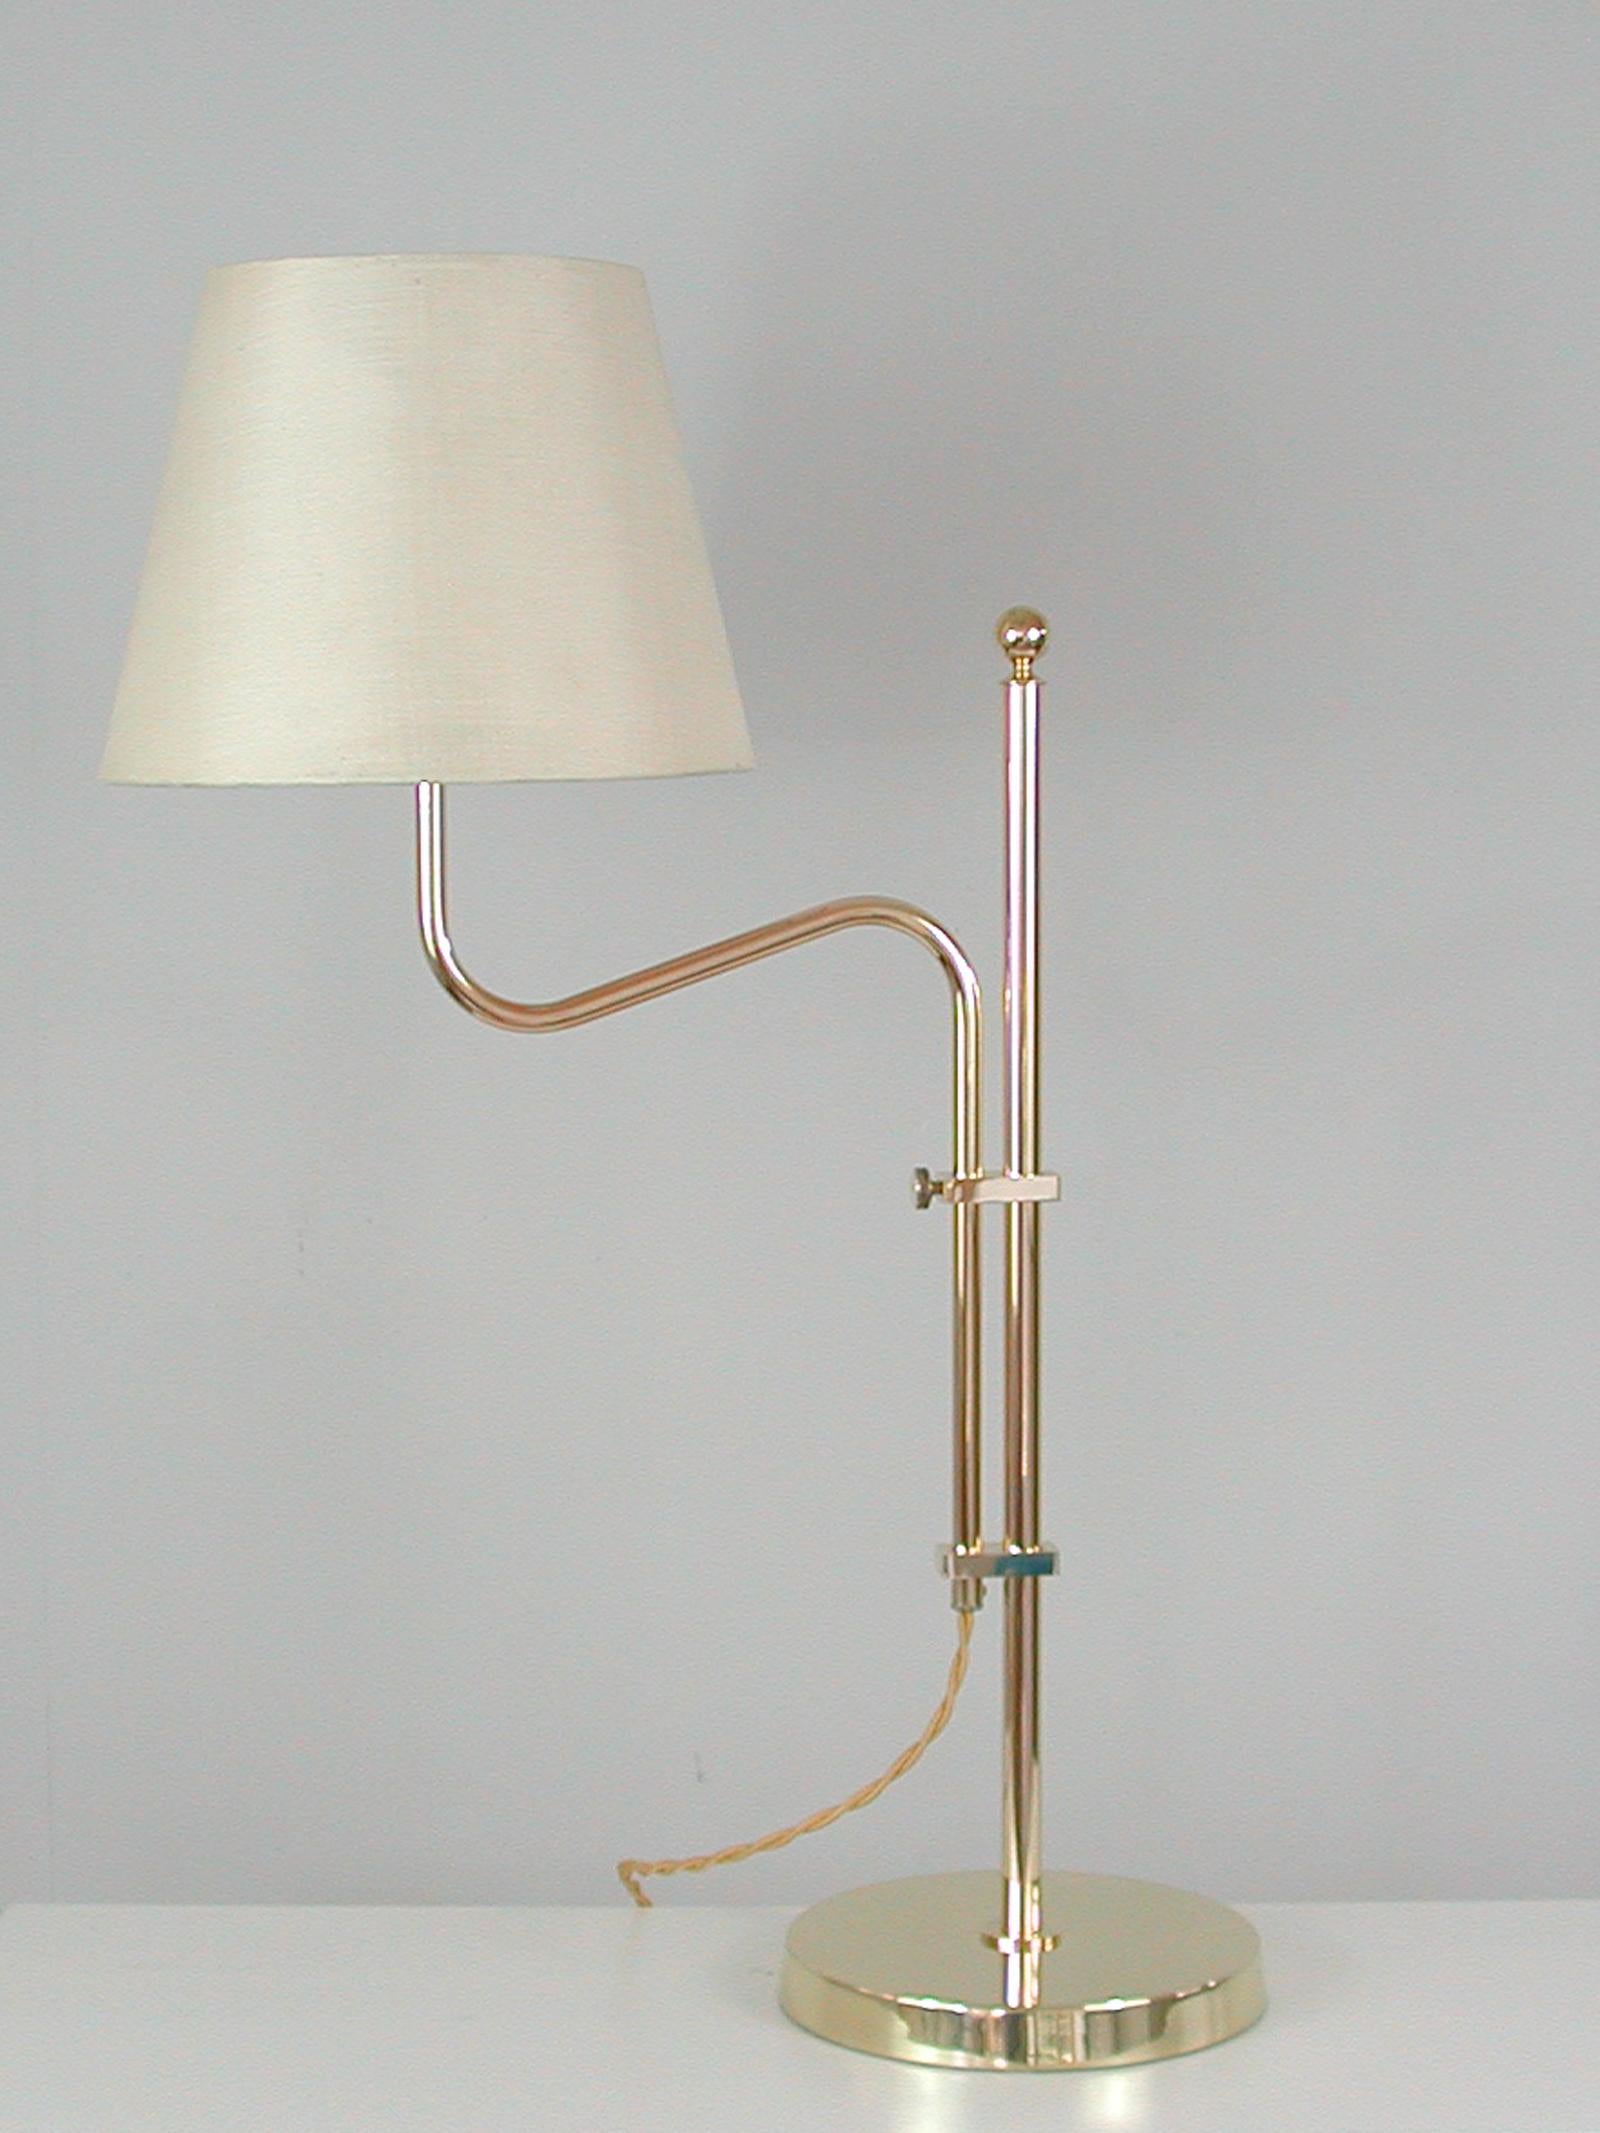 Adjustable Brass Table Lamp by Bergboms, Sweden, 1950s For Sale 1